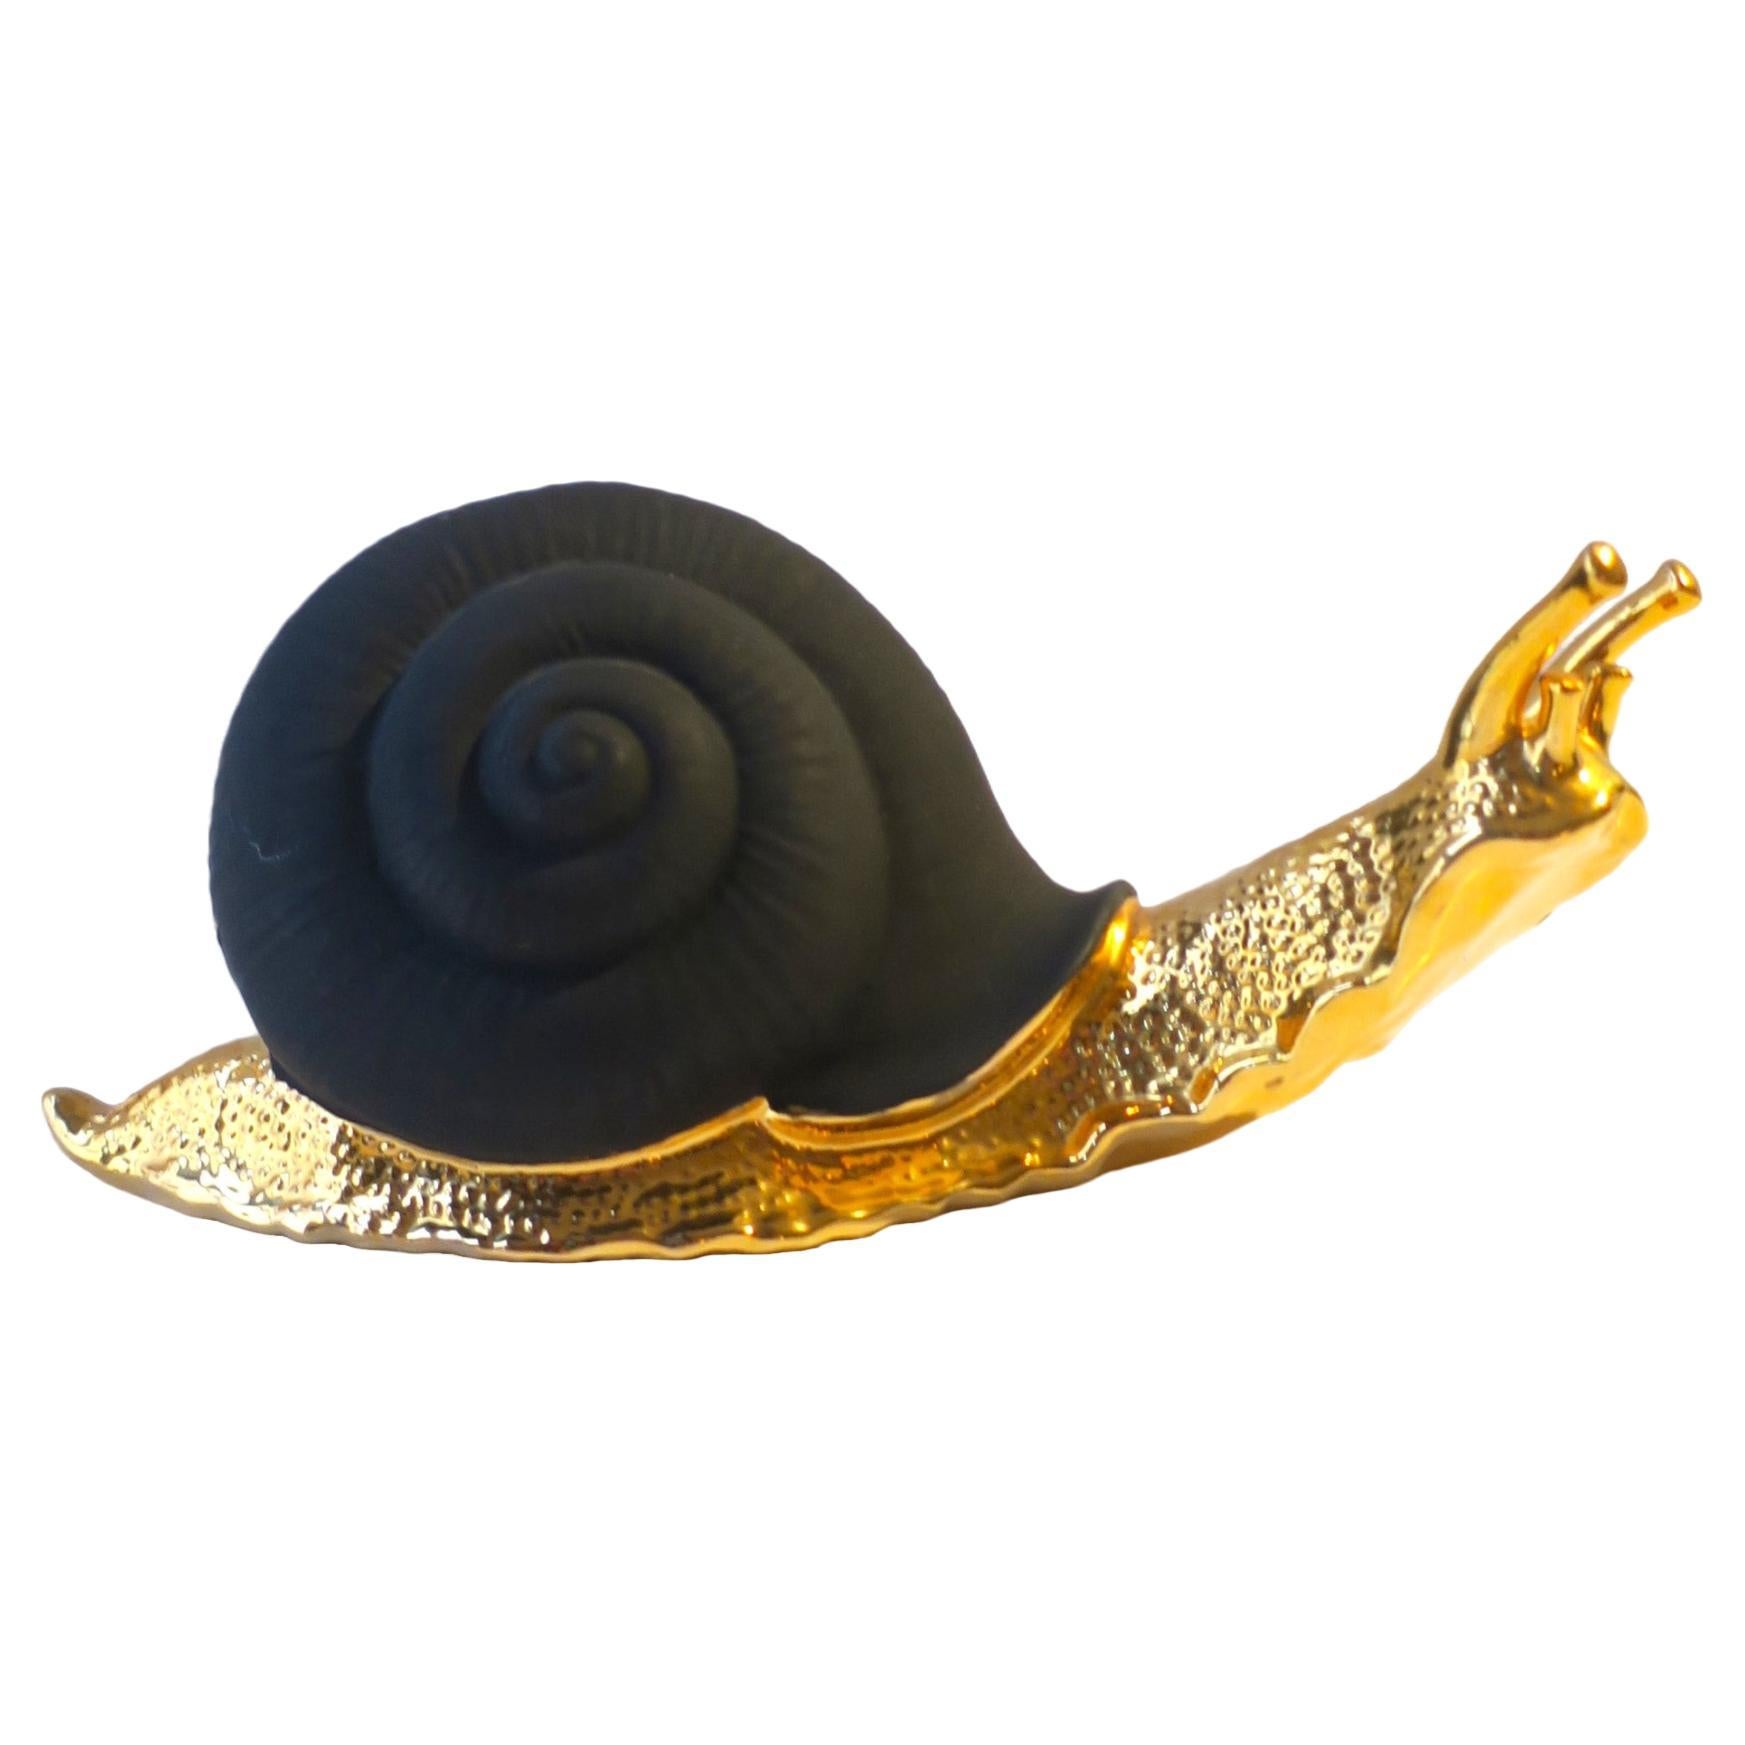 Italian Snail Sculpture Black and Gold 